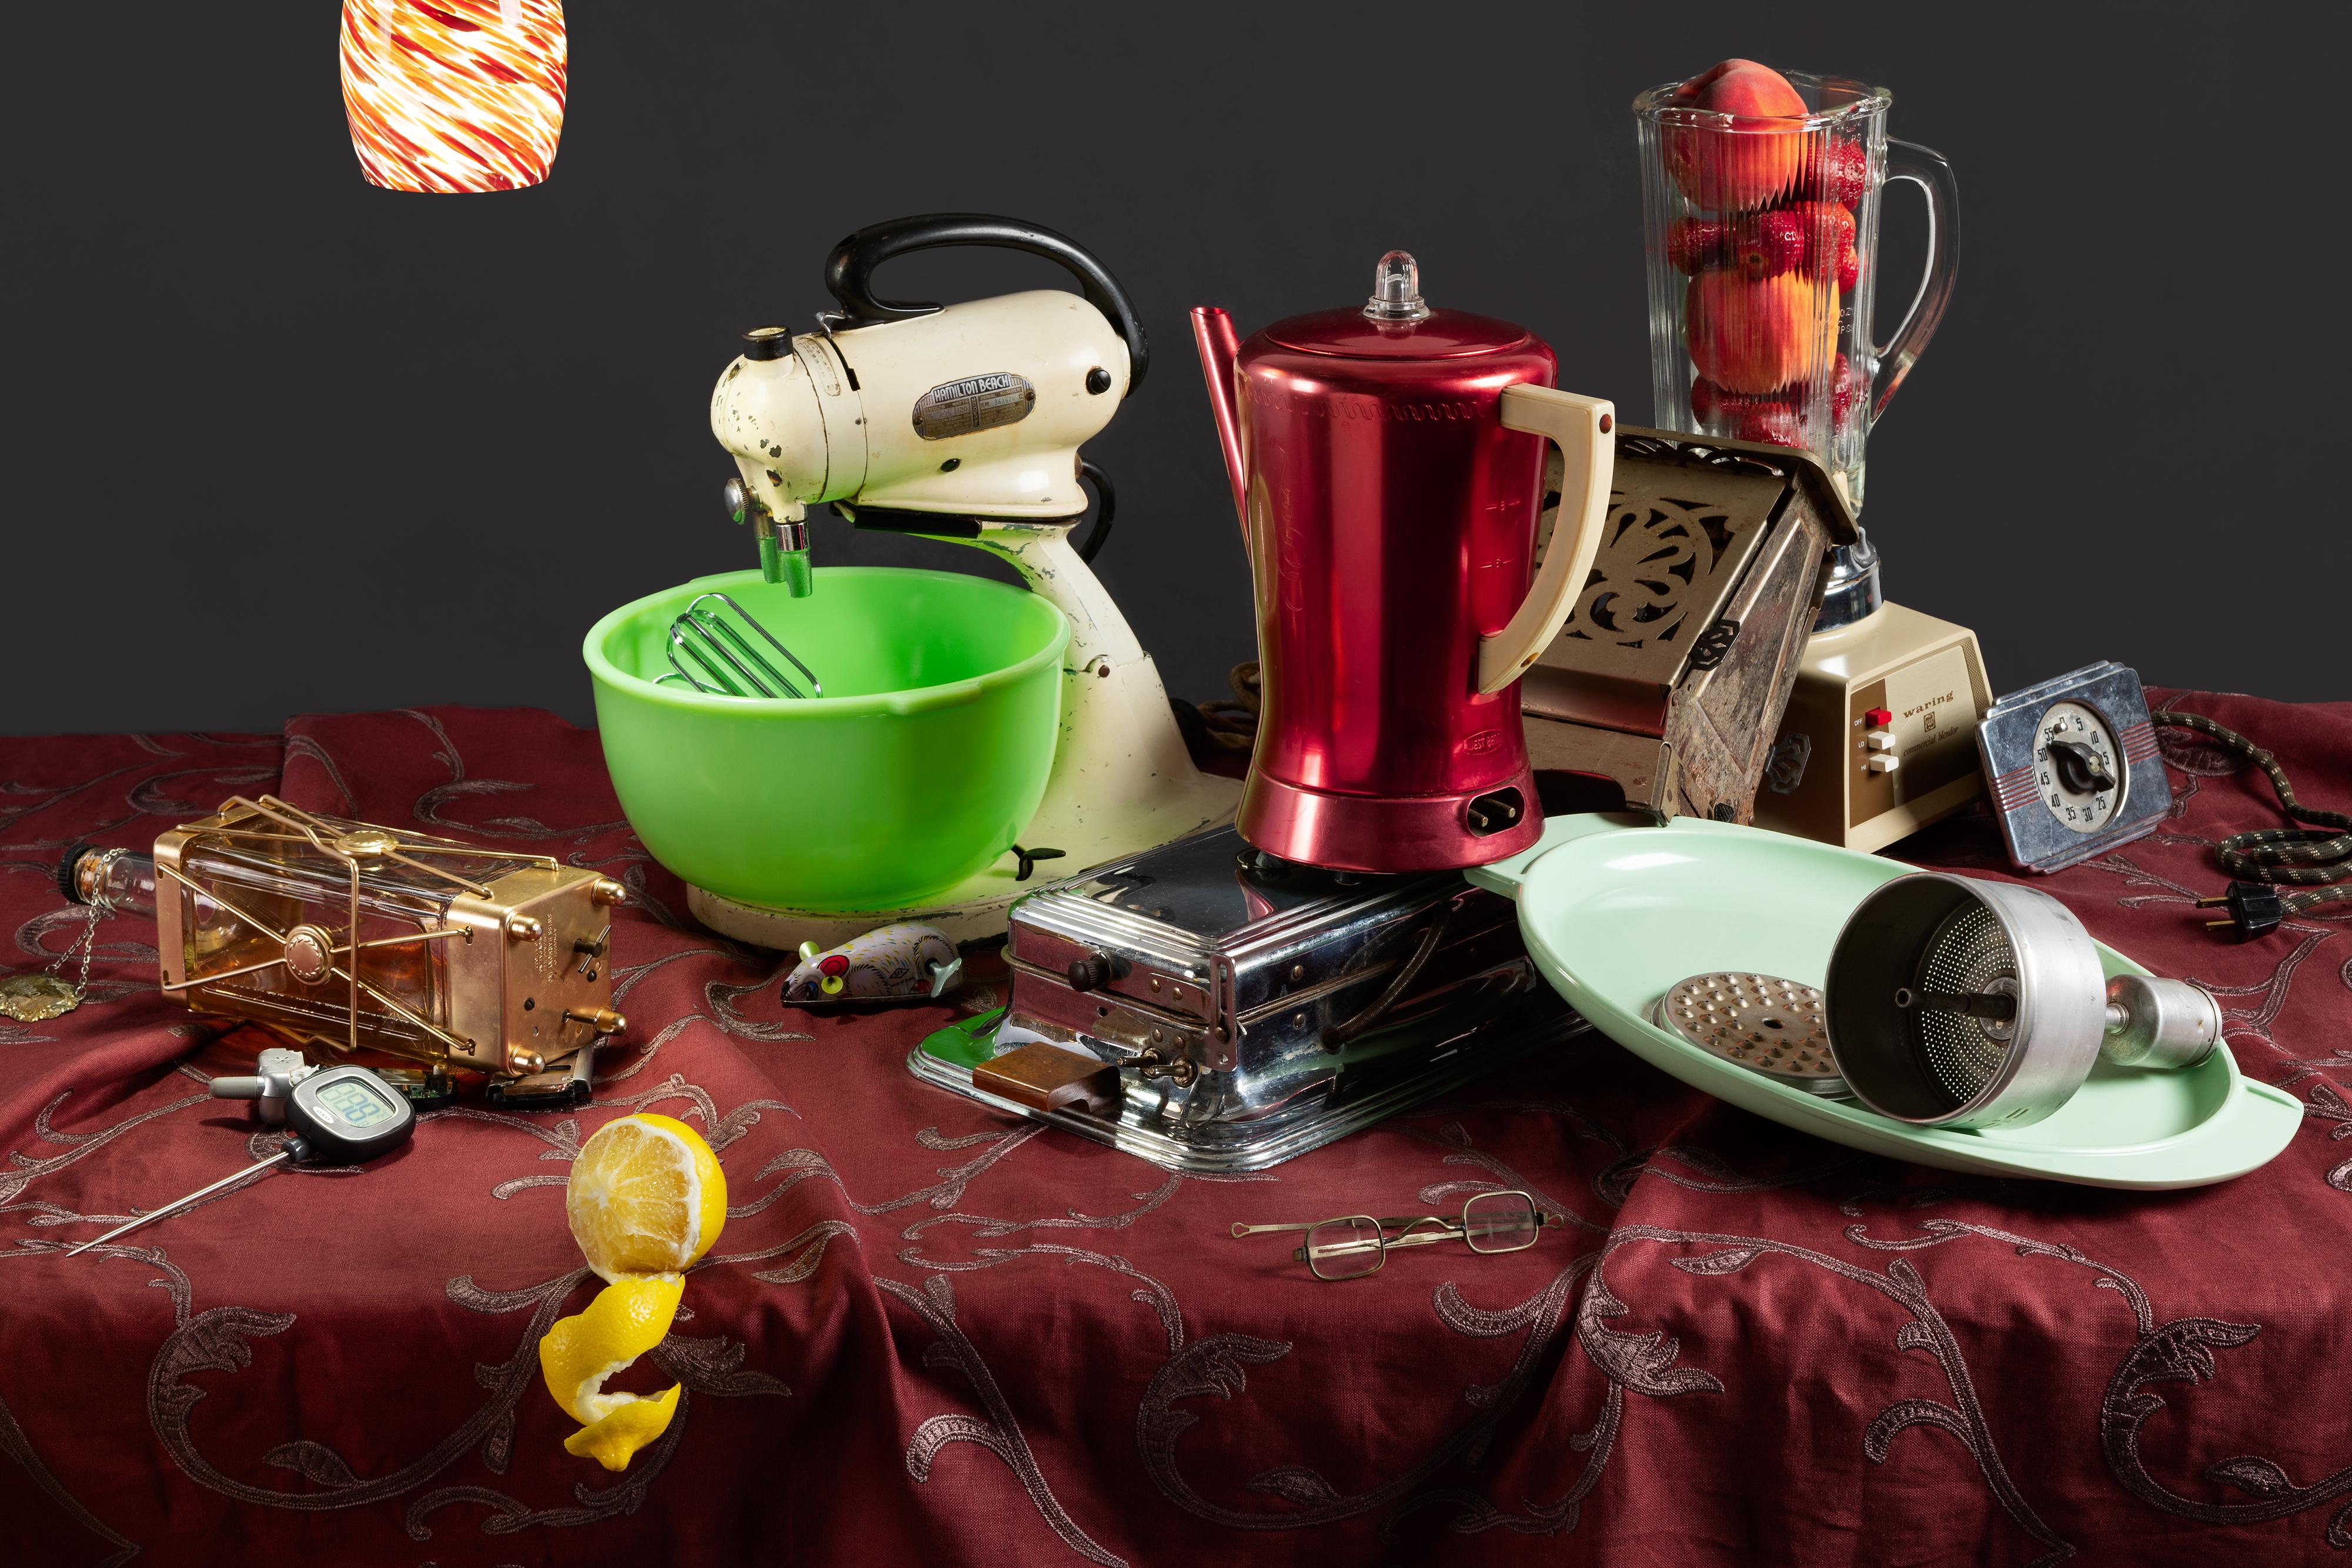 Jeanette May Color Photograph - "Tech Vanitas: Musical Decanter" contemporary still-life photo of vintage tech